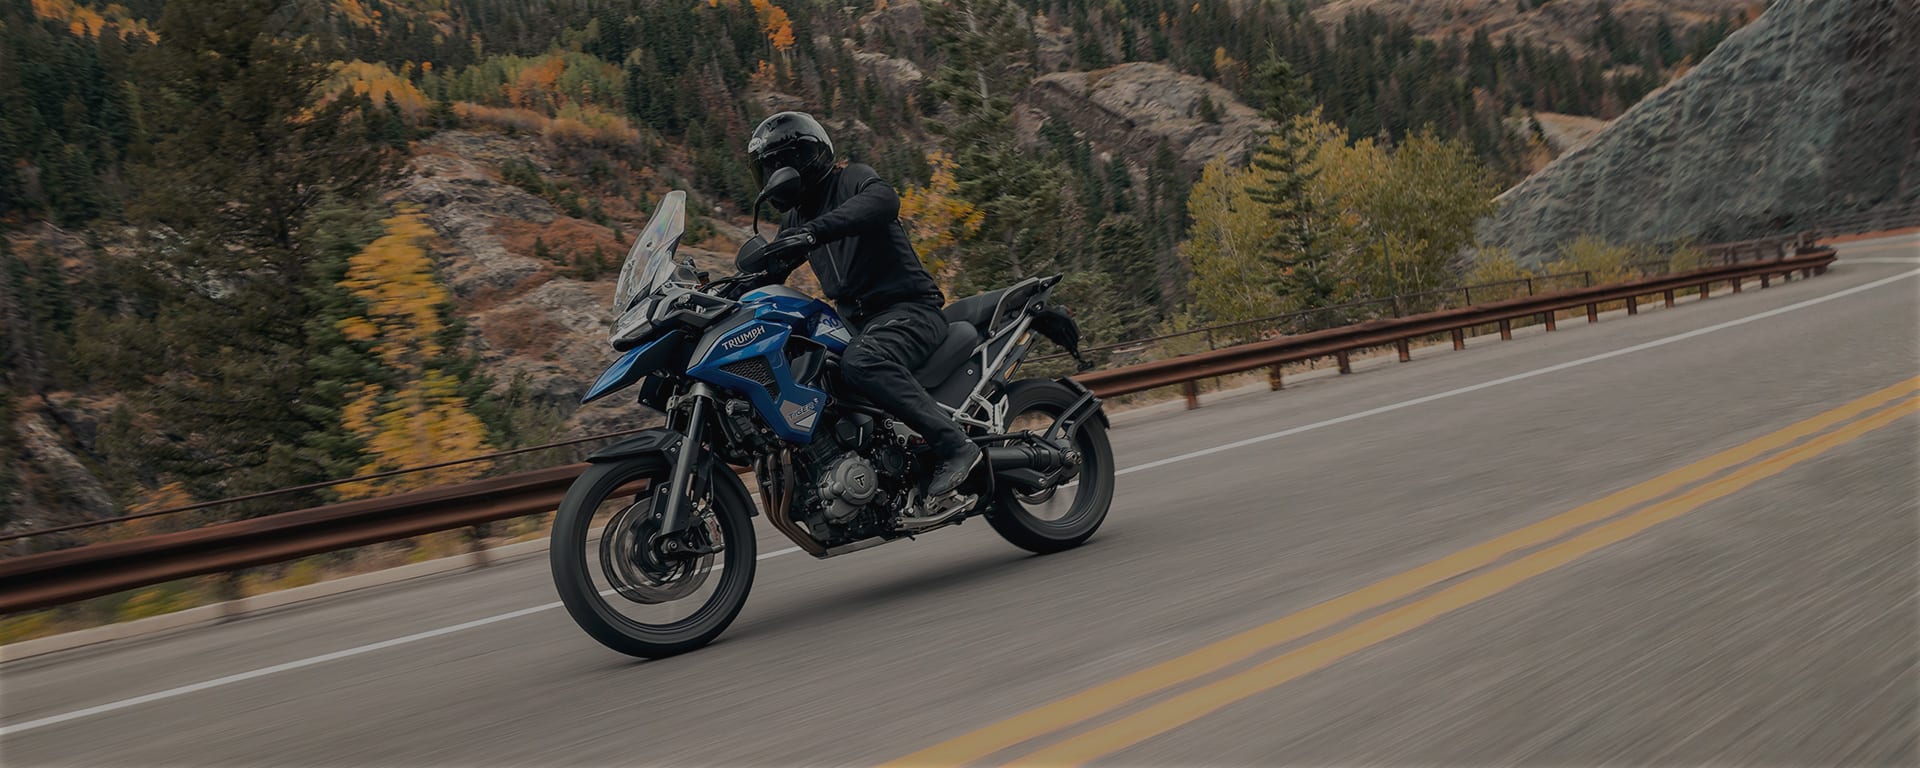 Triumph Tiger 1200 GT Pro riding on mountain road)